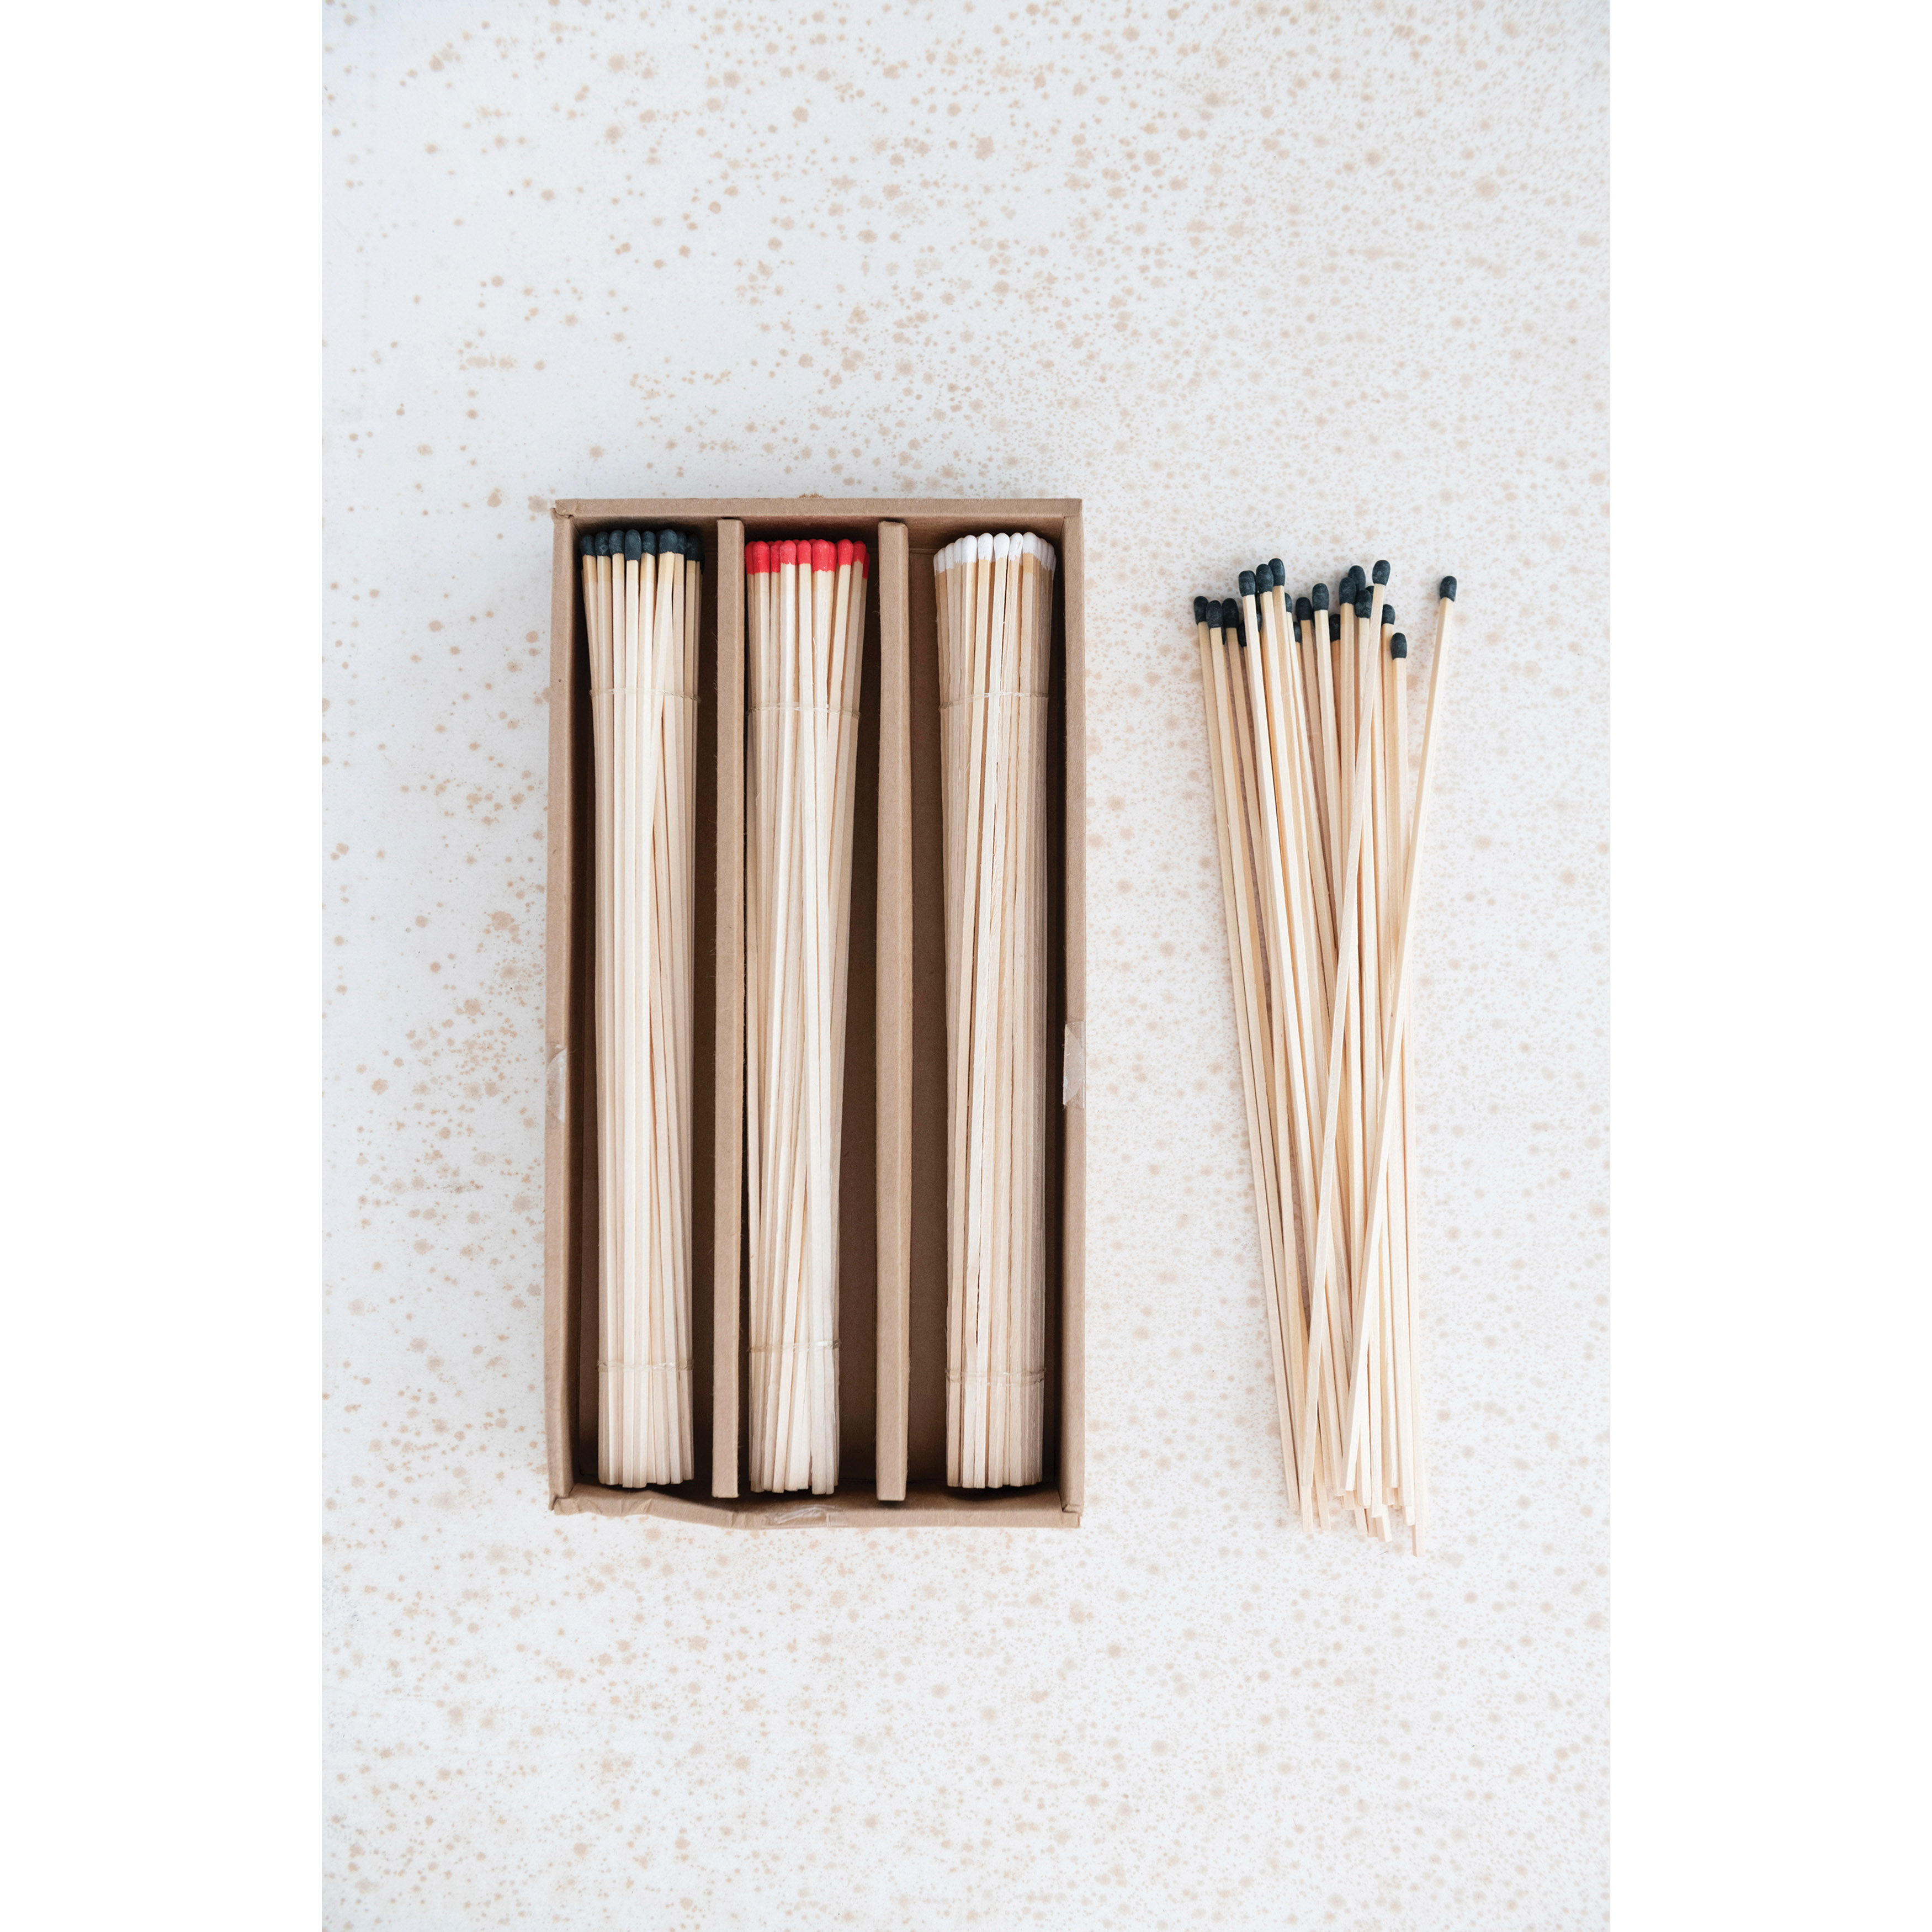 colored matches sticks safety matches in